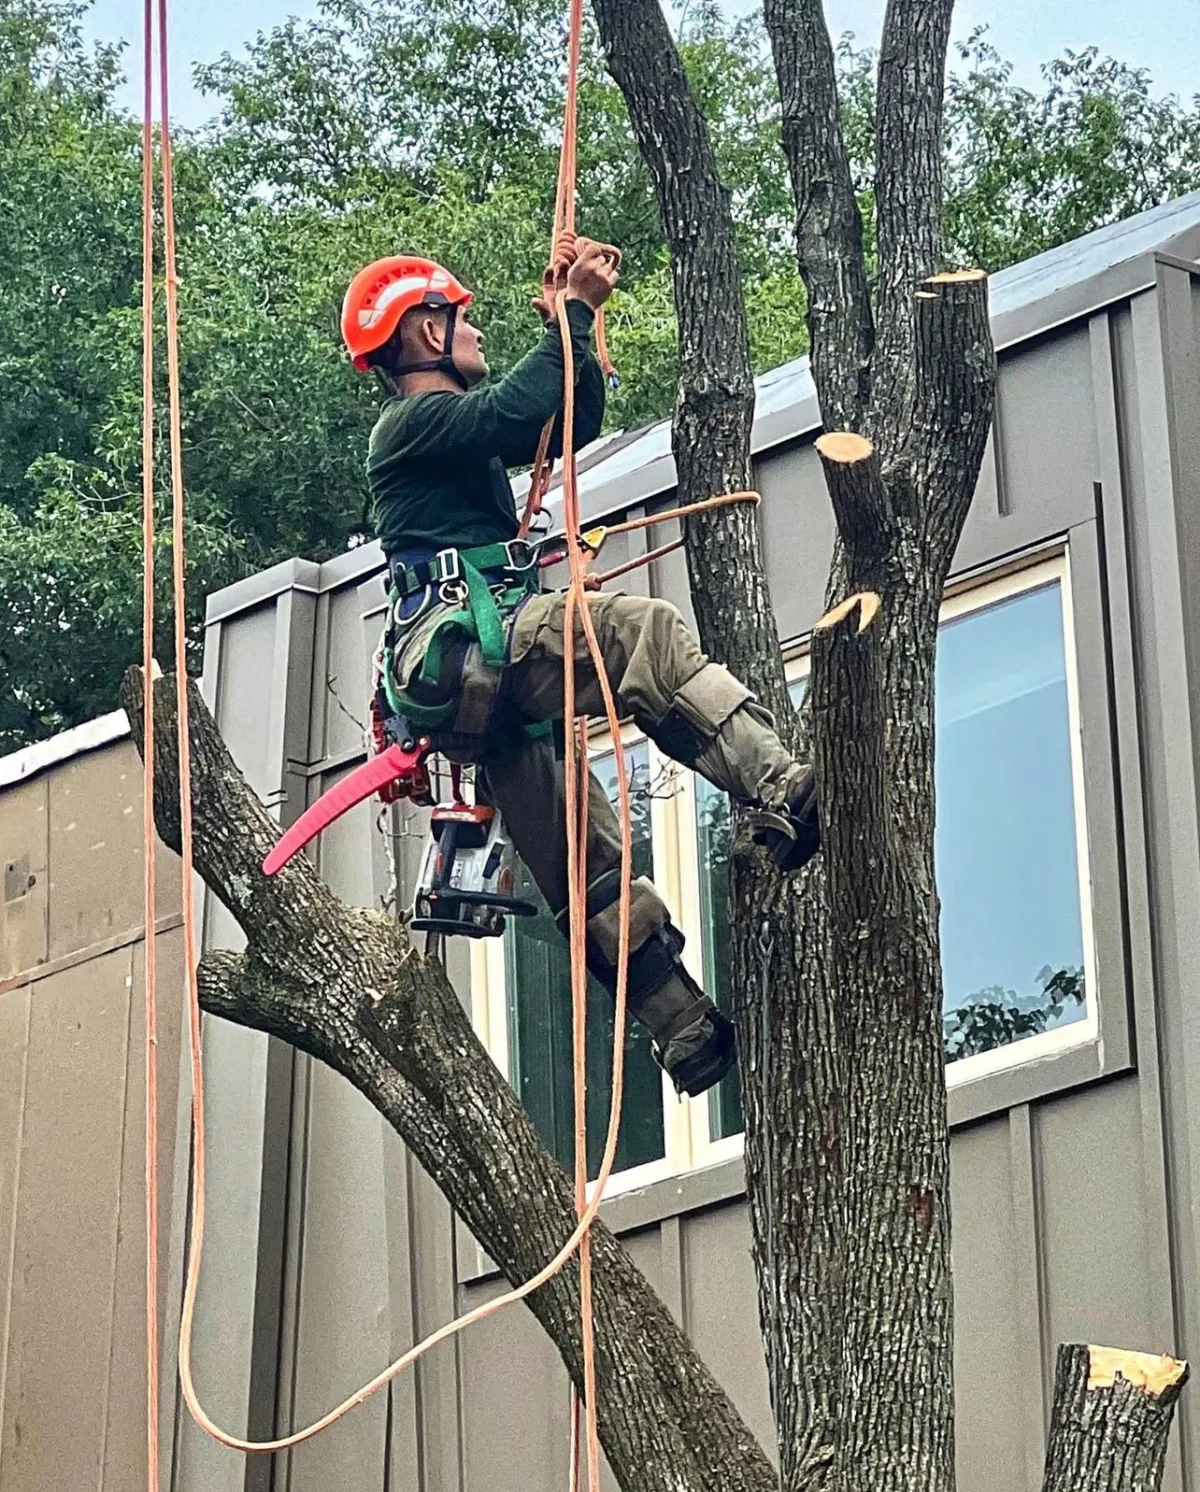 tree-surgeon-trimming-branches